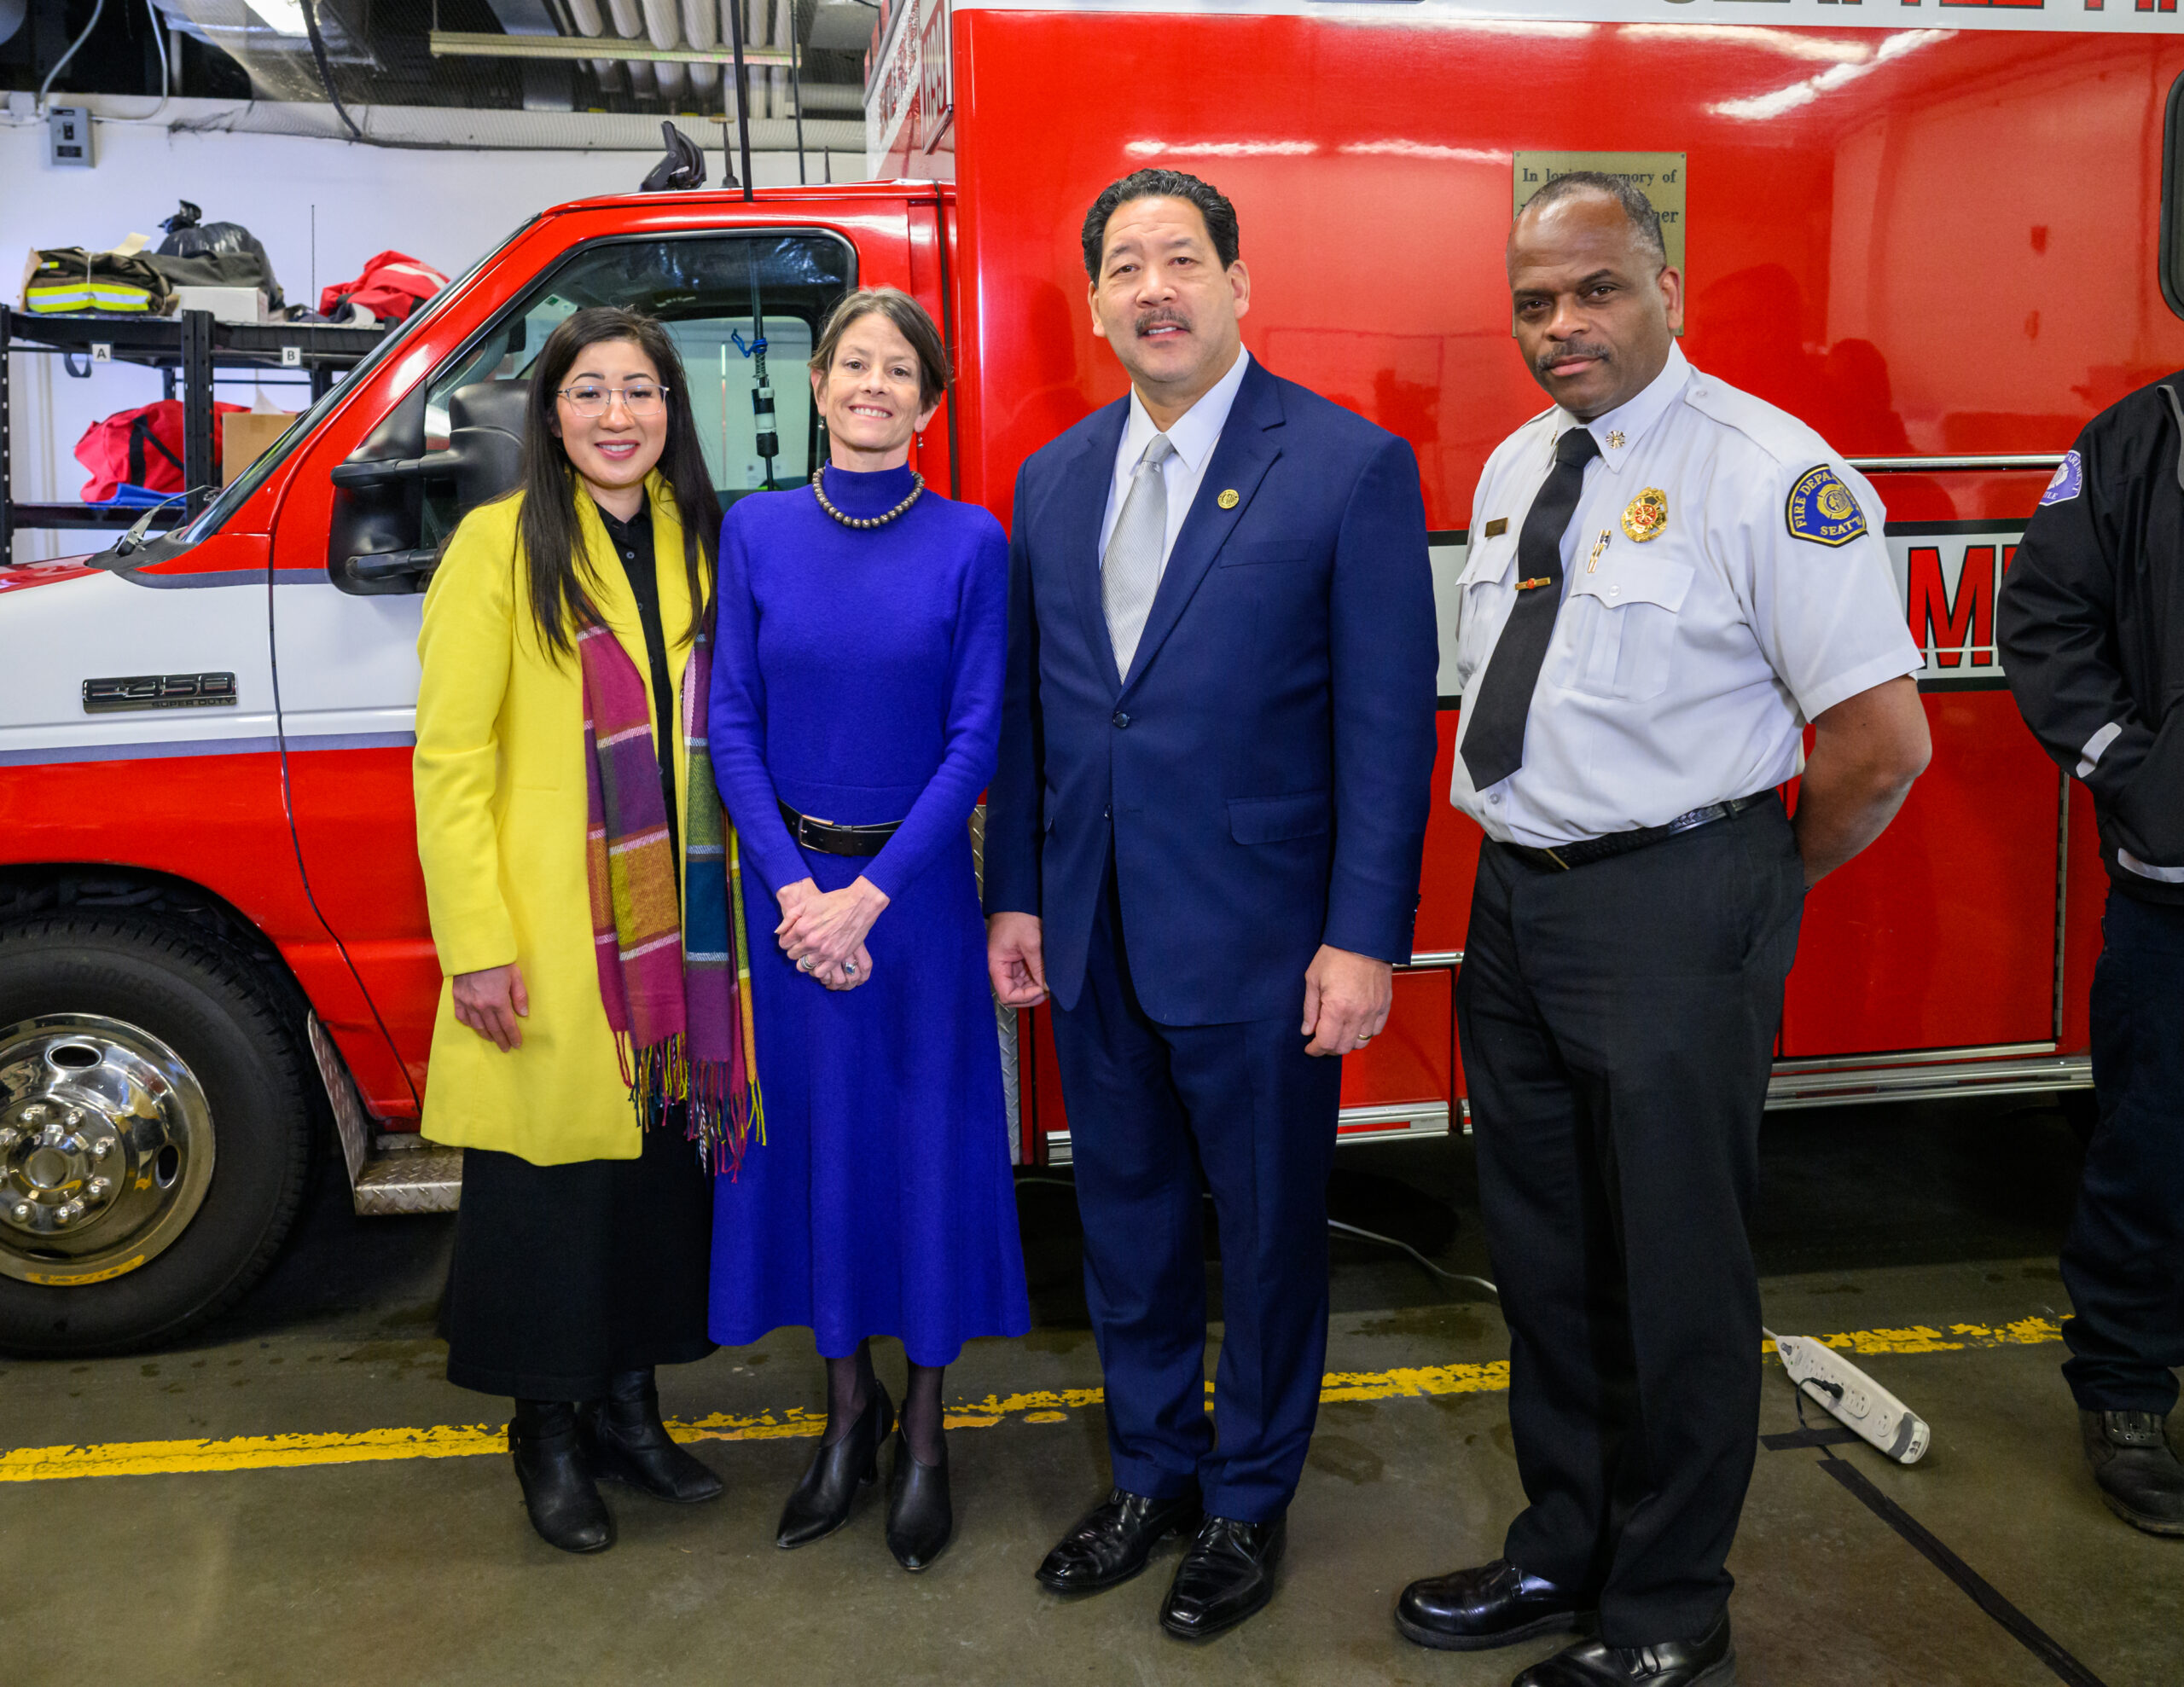 Mayor Harrell stands with Councilmember Tanya Woo, Council president Sara Nelson, and Fire Chief Scoggins